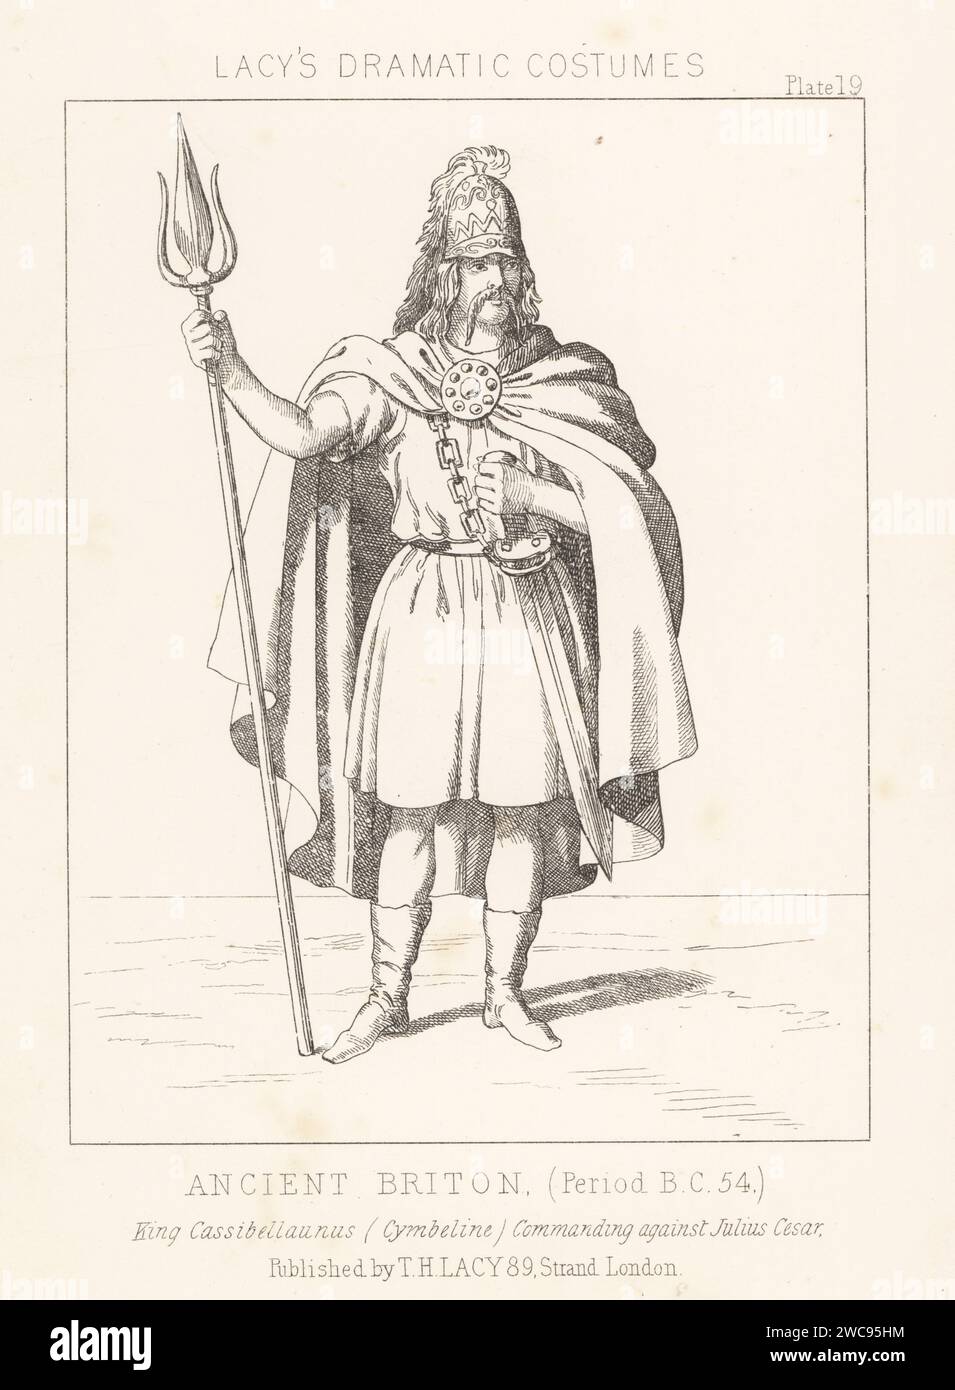 Cassivellaunus or Caswallawn, British military leader, 1st century BC. Ancient Briton, period 54 BC. King Cassibellaunus commanding against Julius Caesar. In helmet, cloak, tunic, boots, armed with sword and trident. Cimbeline (sic). Lithograph from Thomas Hailes Lacy's Male Costumes, Historical, National and Dramatic in 200 Plates, London, 1865. Lacy (1809-1873) was a British actor, playwright, theatrical manager and publisher. Stock Photo